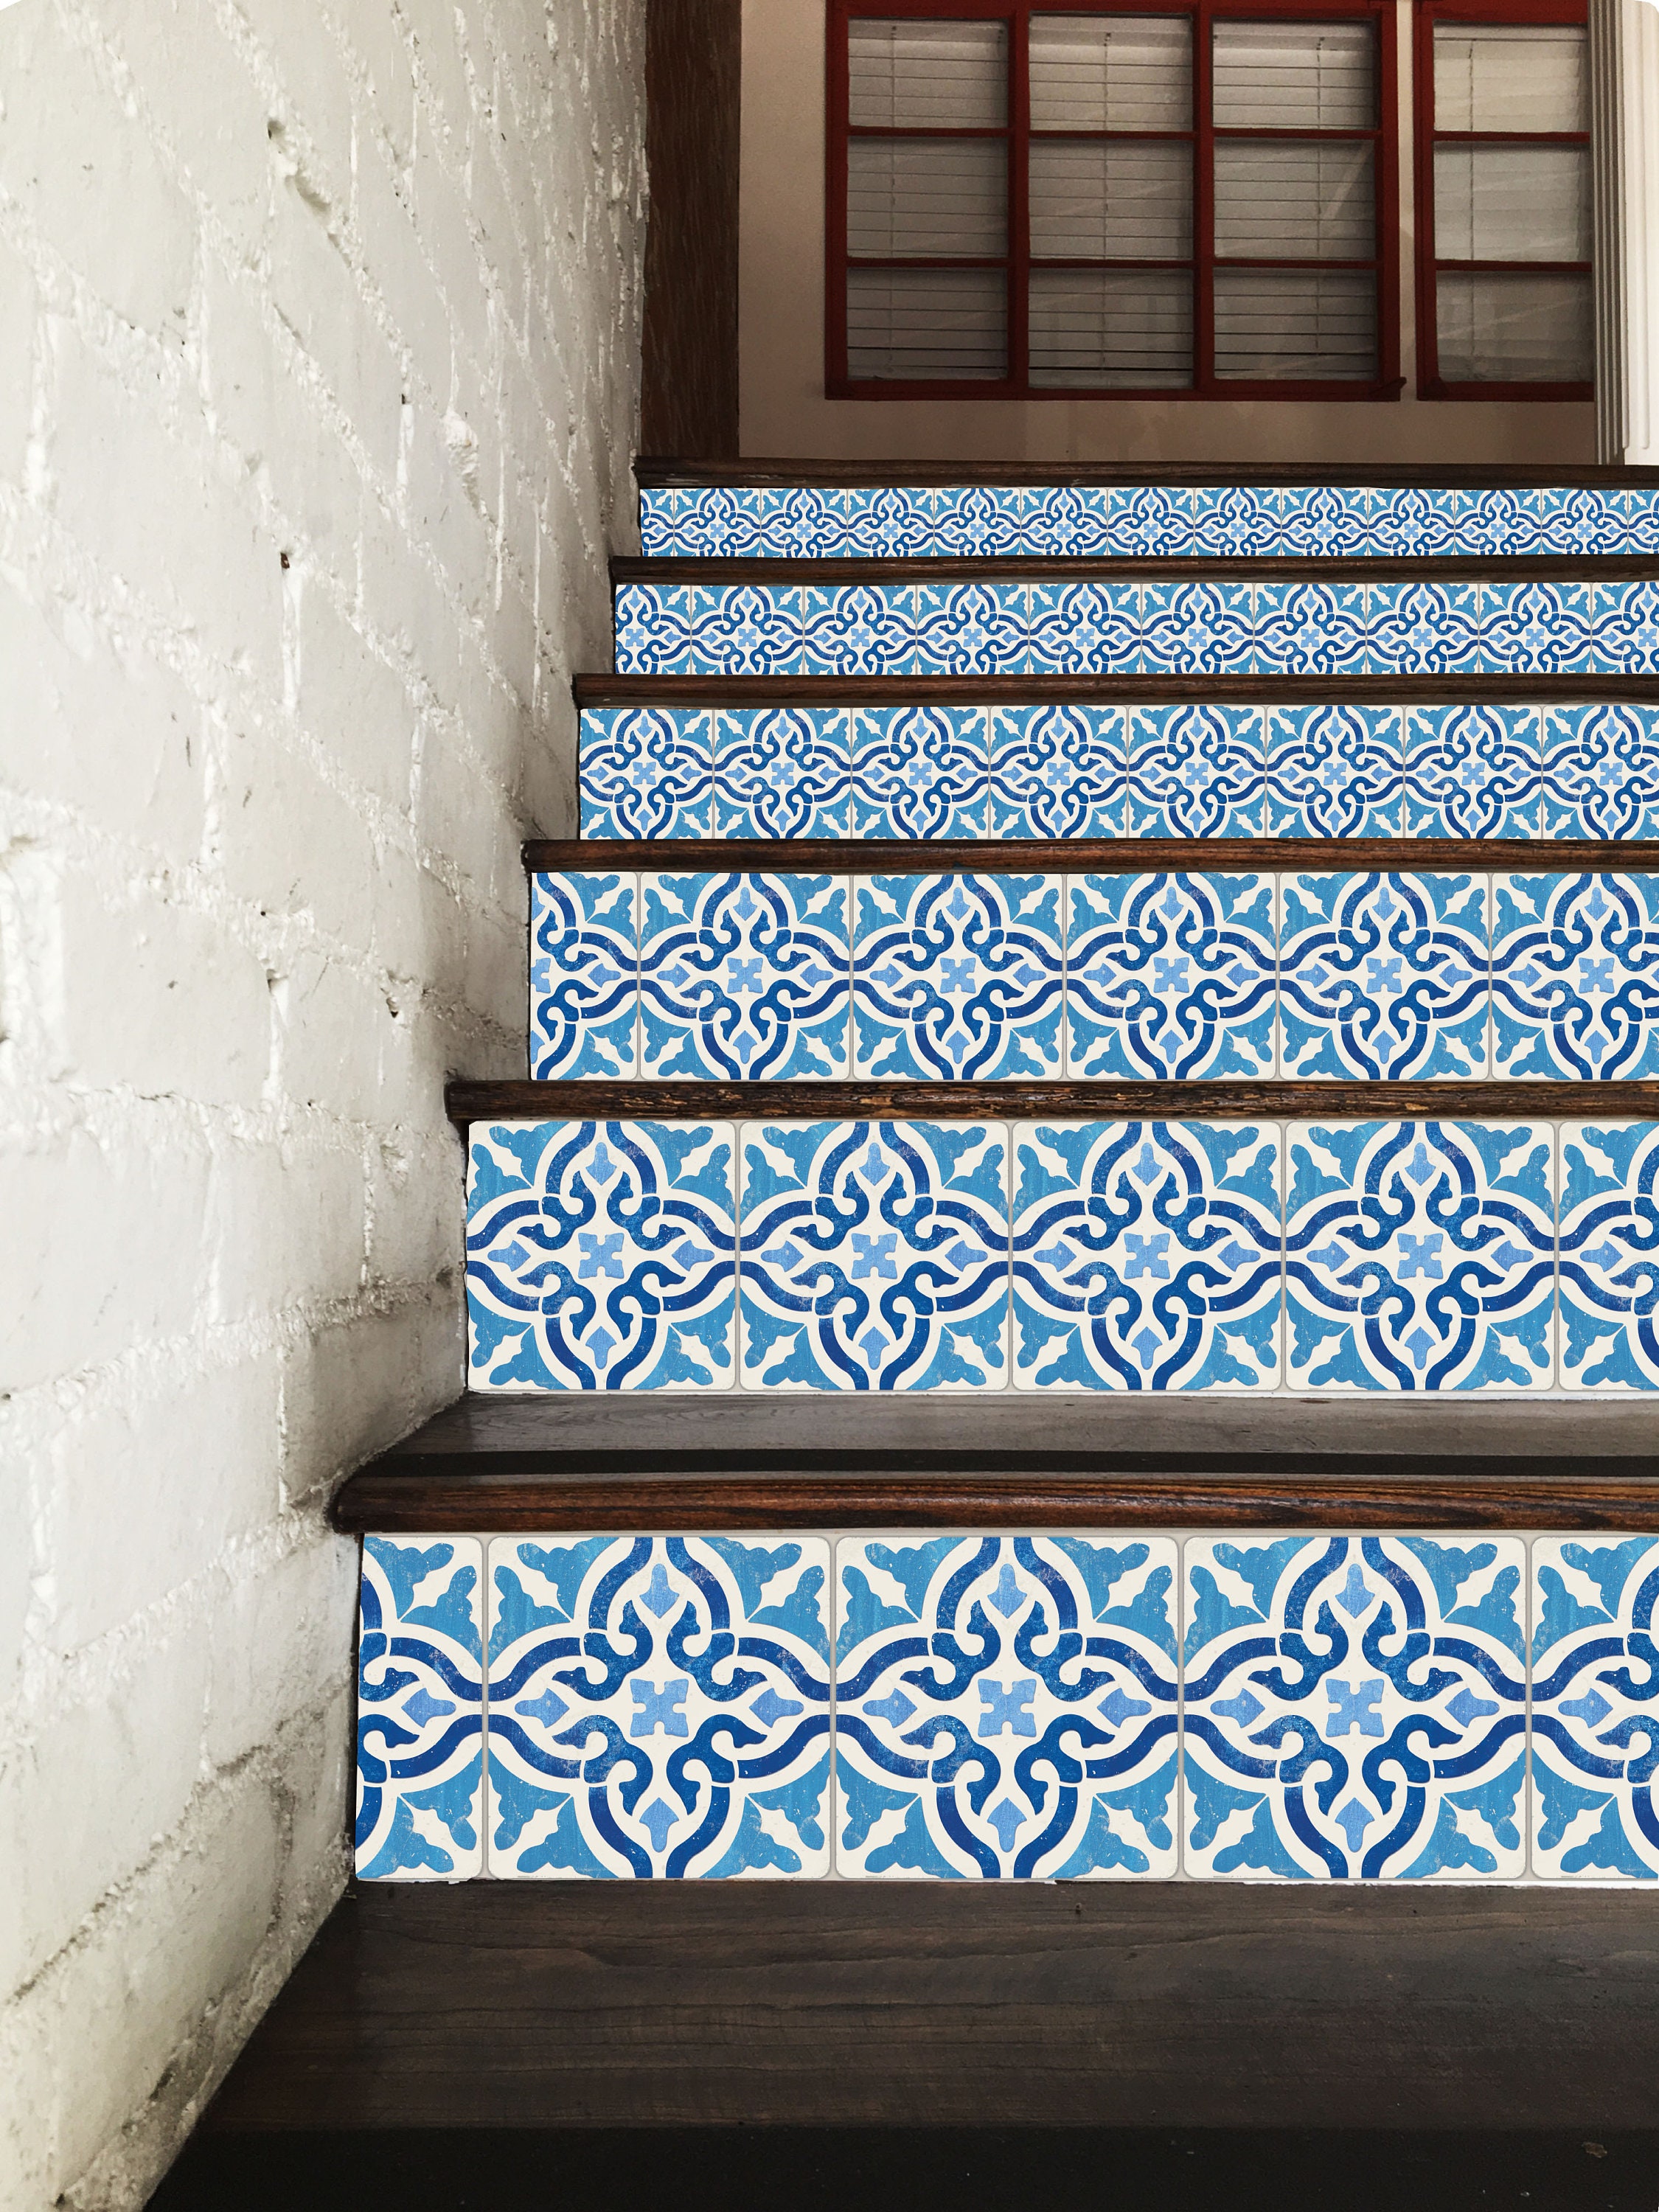 Blue Toledo Tiles Removable Stair Riser Decals | Etsy